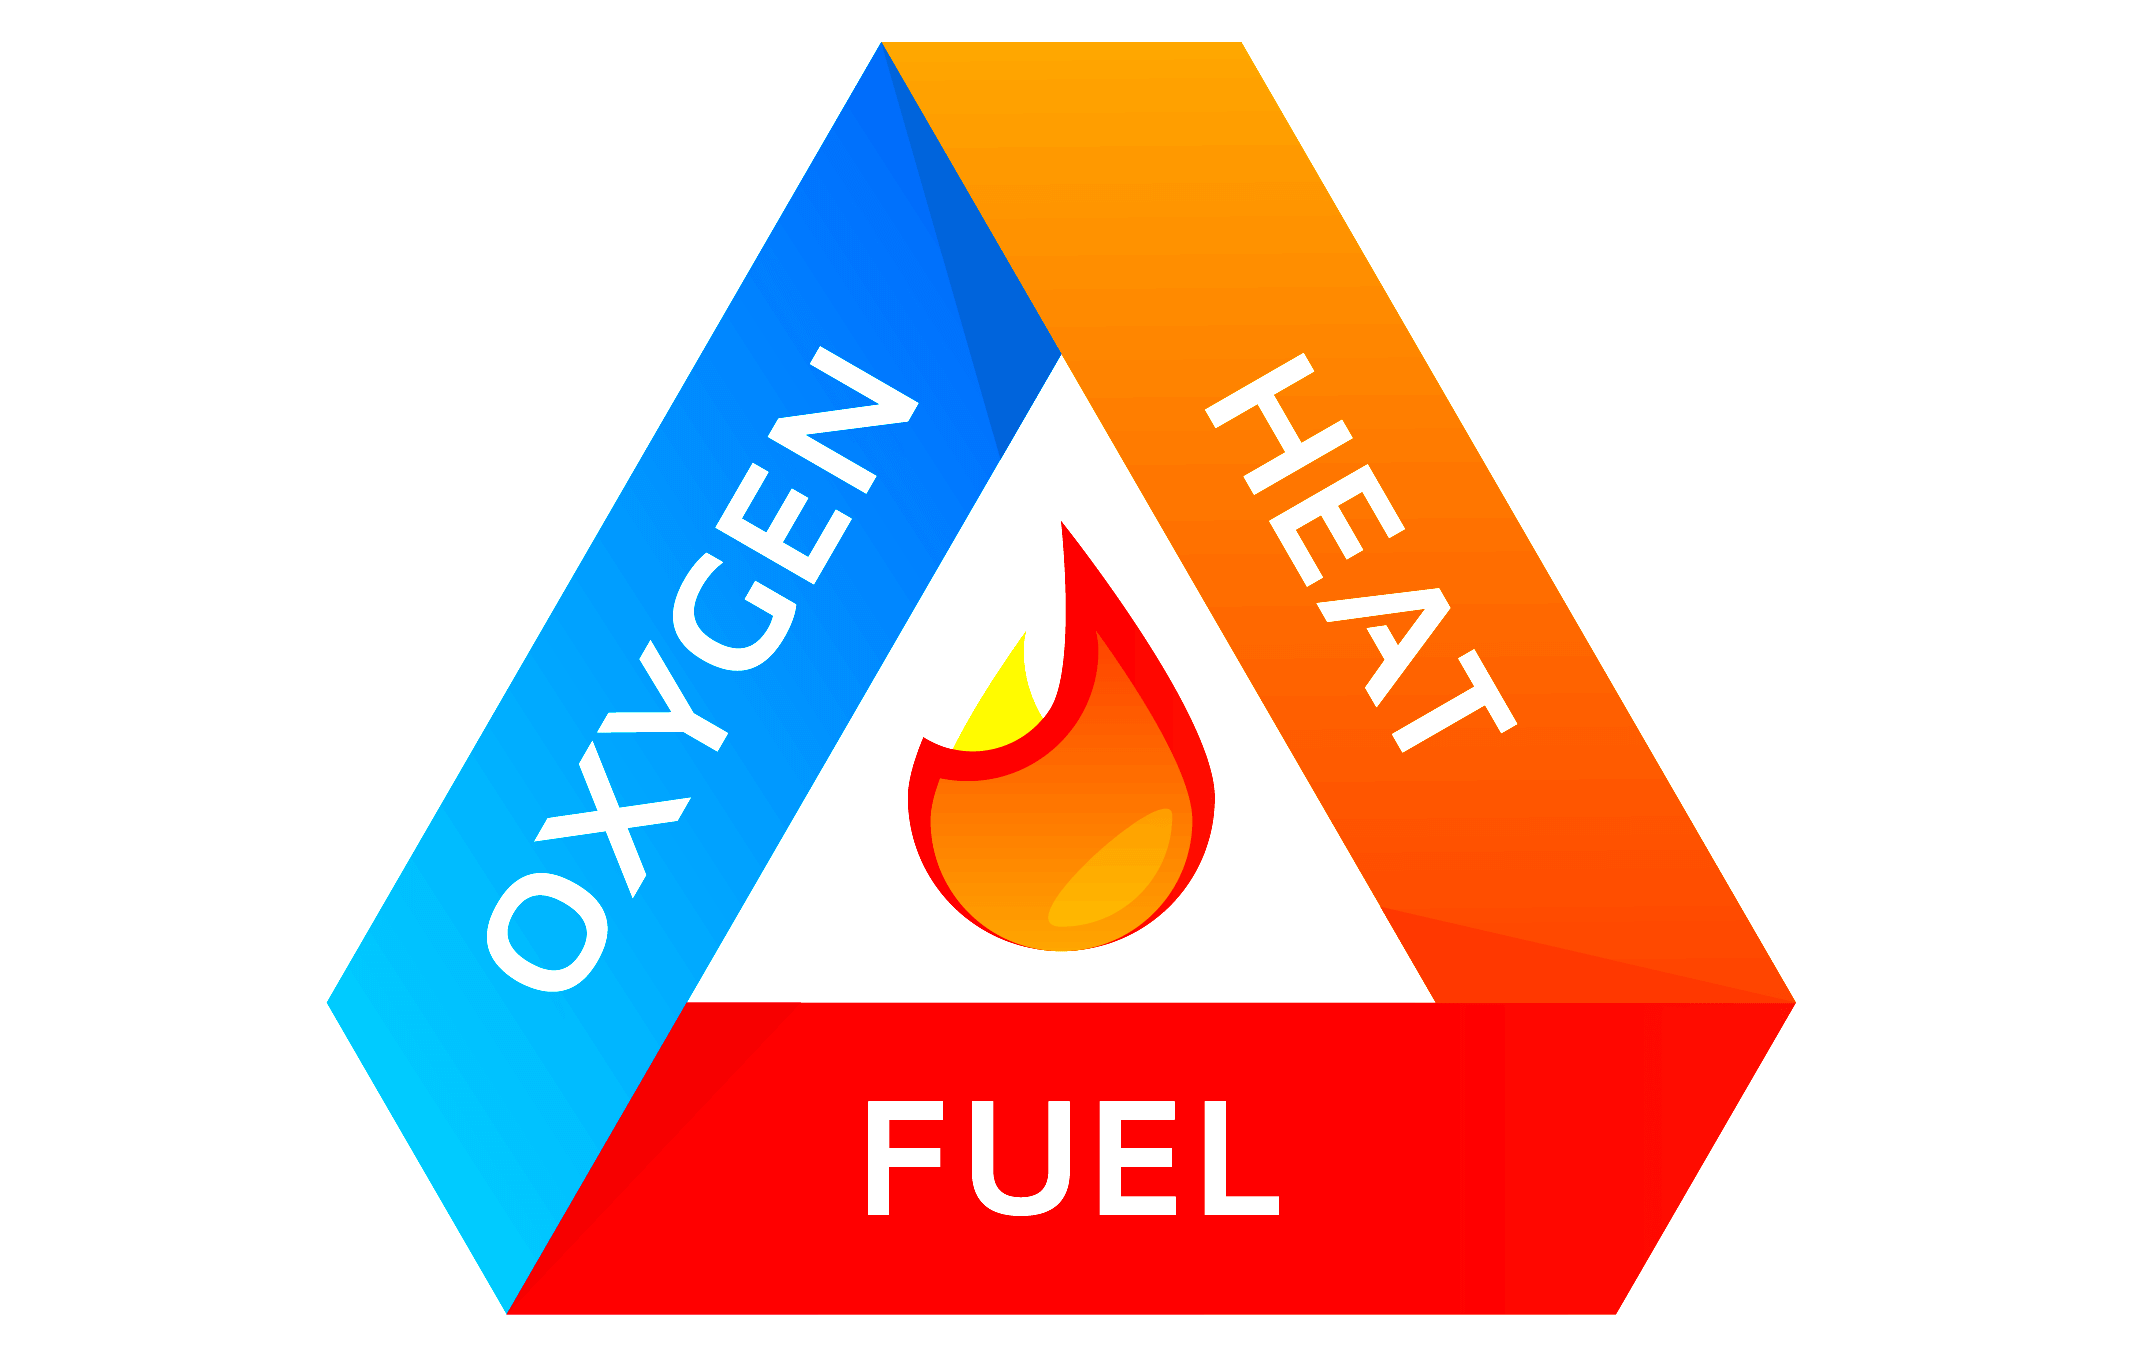 What is fire triangle